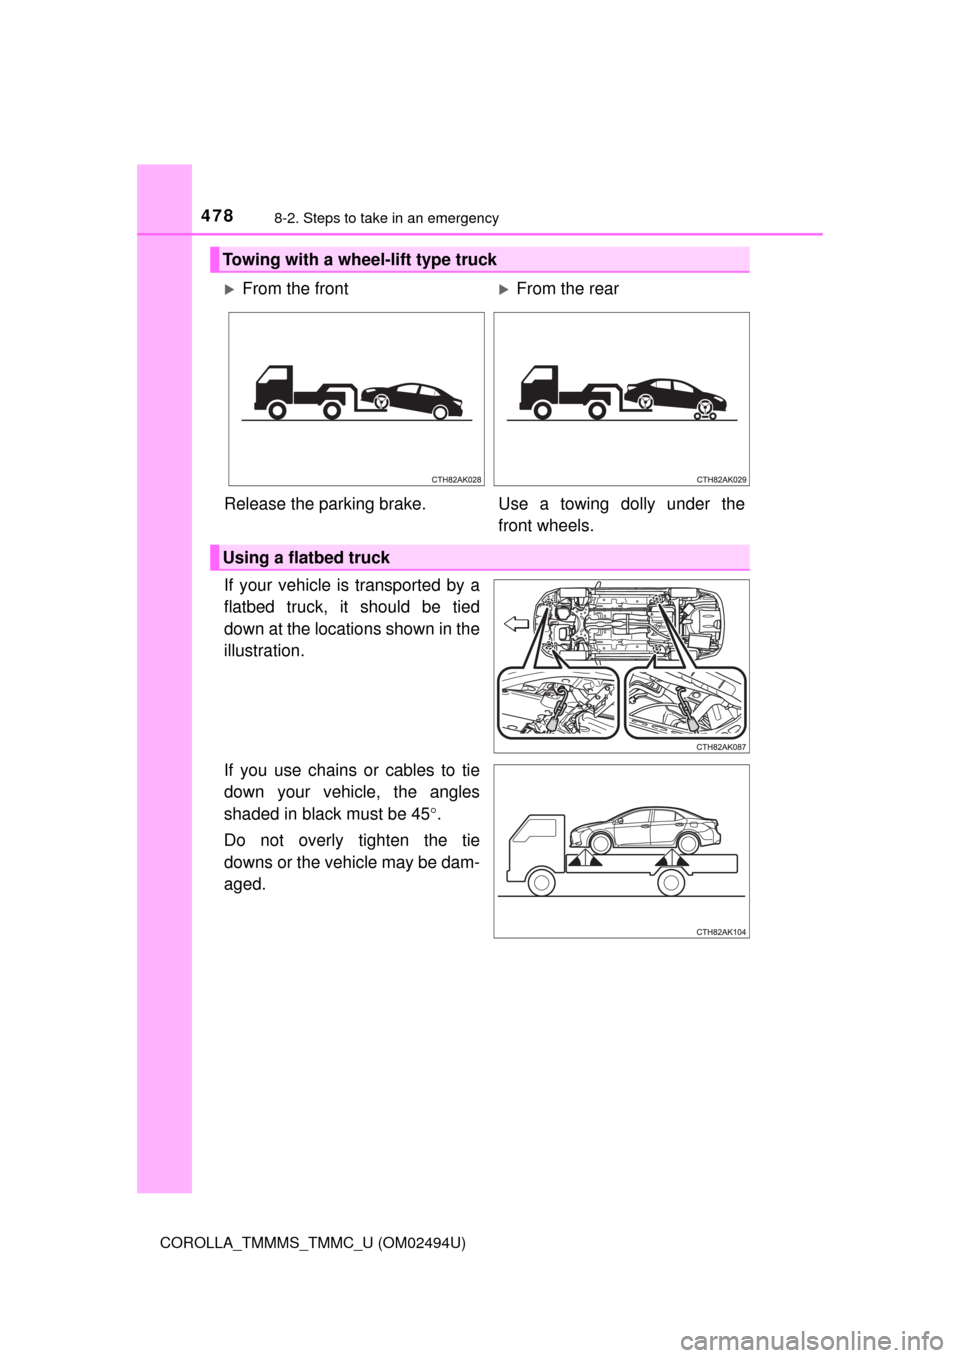 TOYOTA COROLLA 2017 11.G Owners Manual 4788-2. Steps to take in an emergency
COROLLA_TMMMS_TMMC_U (OM02494U)
If your vehicle is transported by a
flatbed truck, it should be tied
down at the locations shown in the
illustration.
If you use c